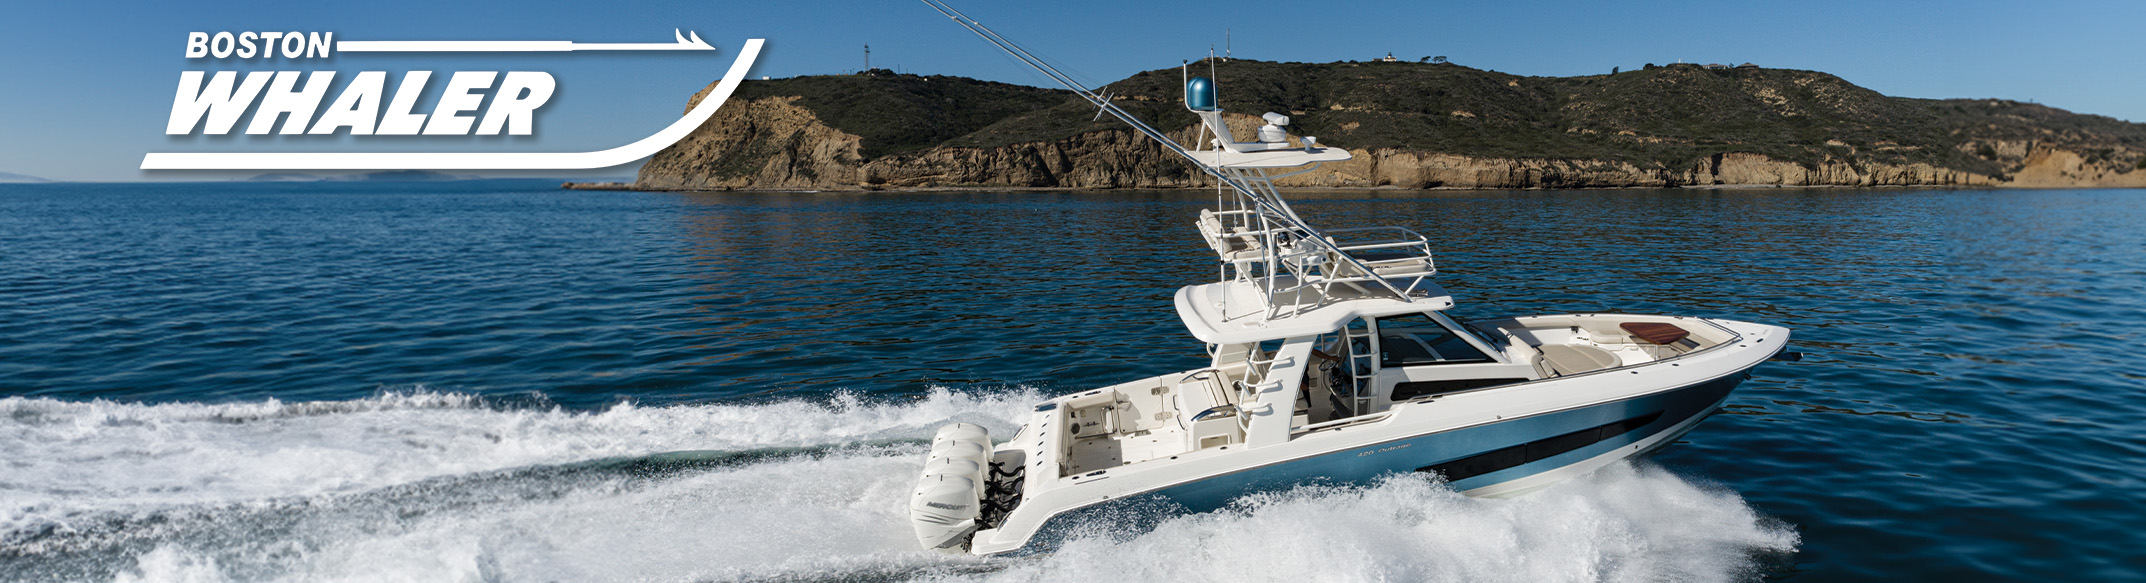 Boston_whaler inventory at Sun Country Inland, San Jose-